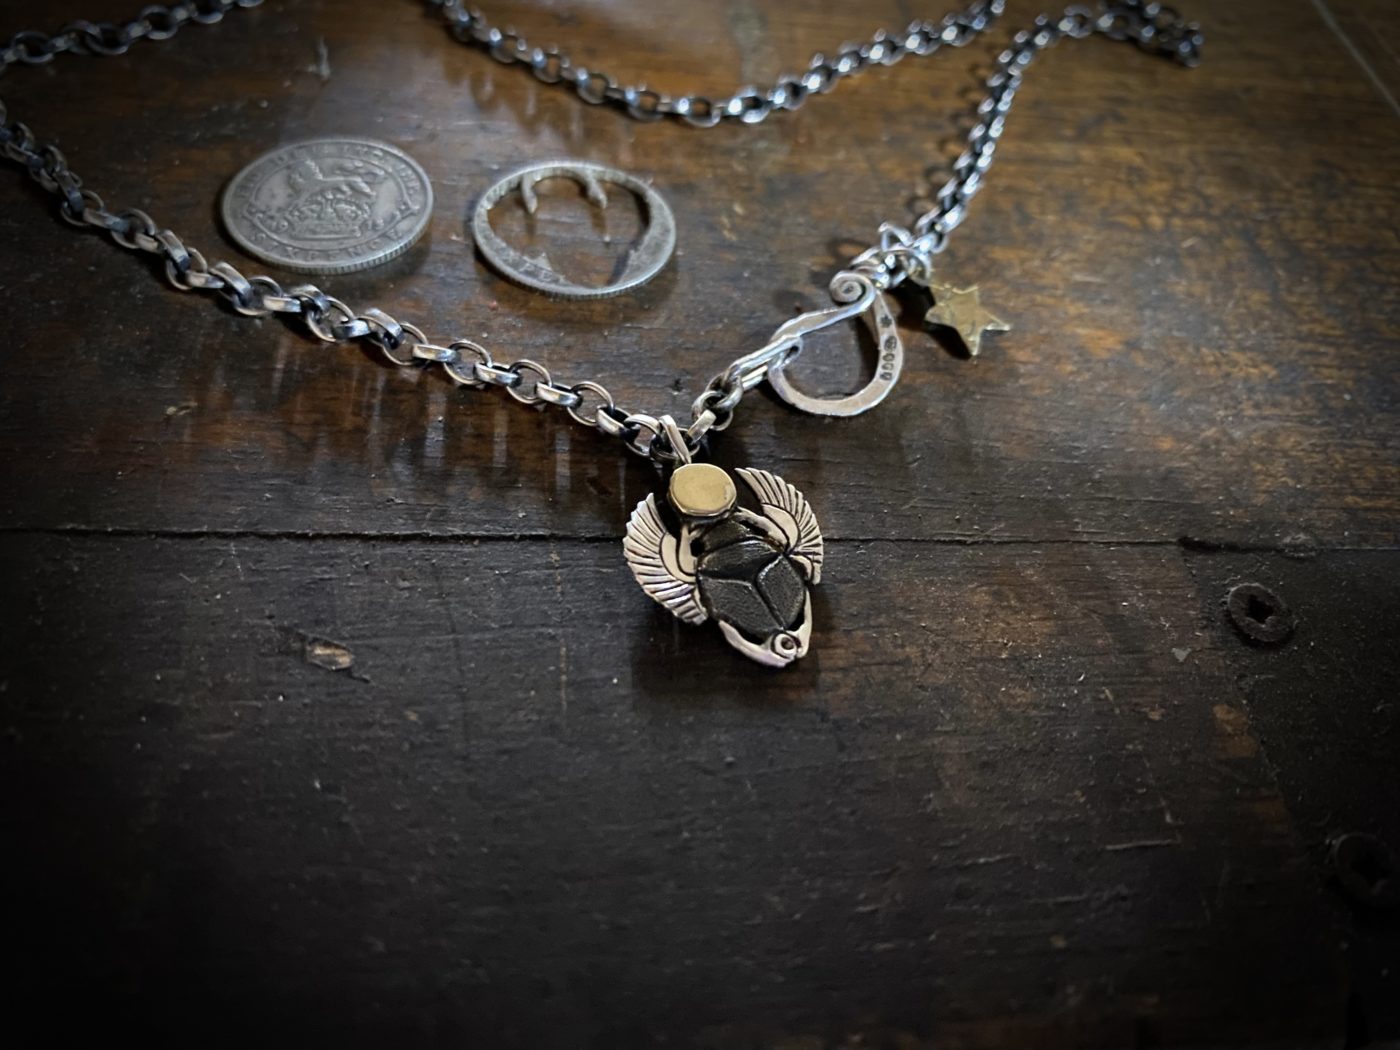 Scarab beetle jewellery - handmade and recycled silver sixpence & bronze coins